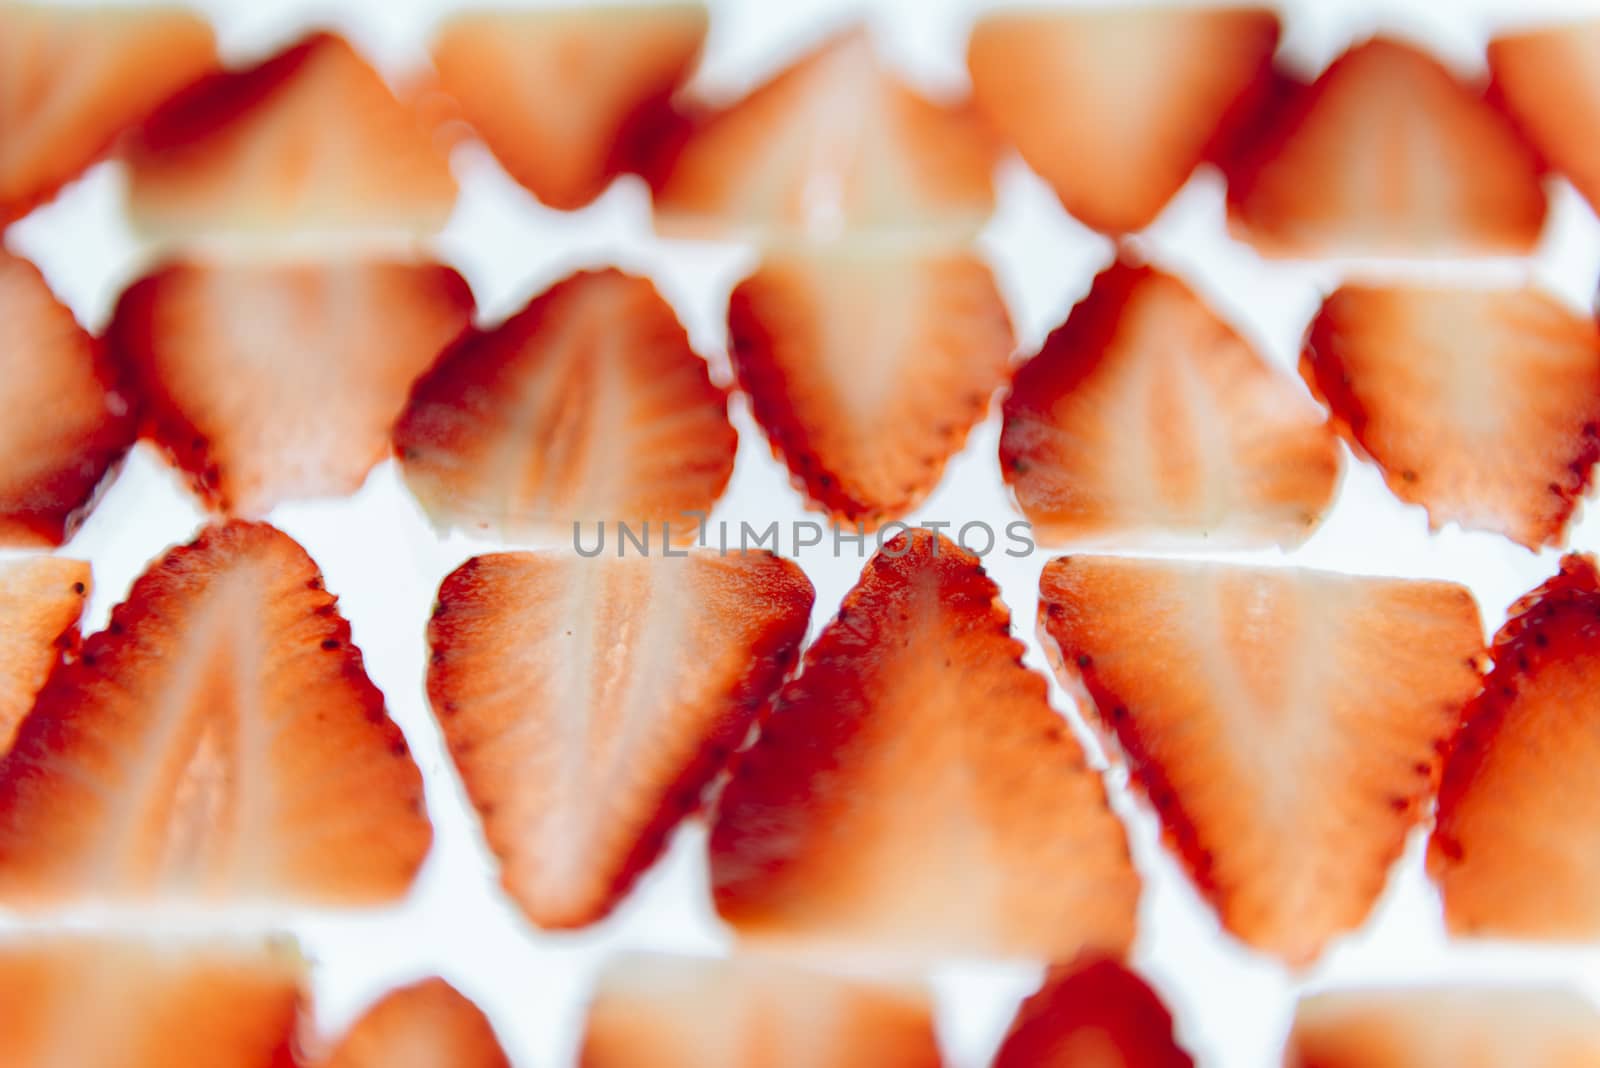 sliced fresh strawberries isolated on white background, neatly arranged slices of red strawberry on a white table, healthy sweet food, vitamins and fruity concept